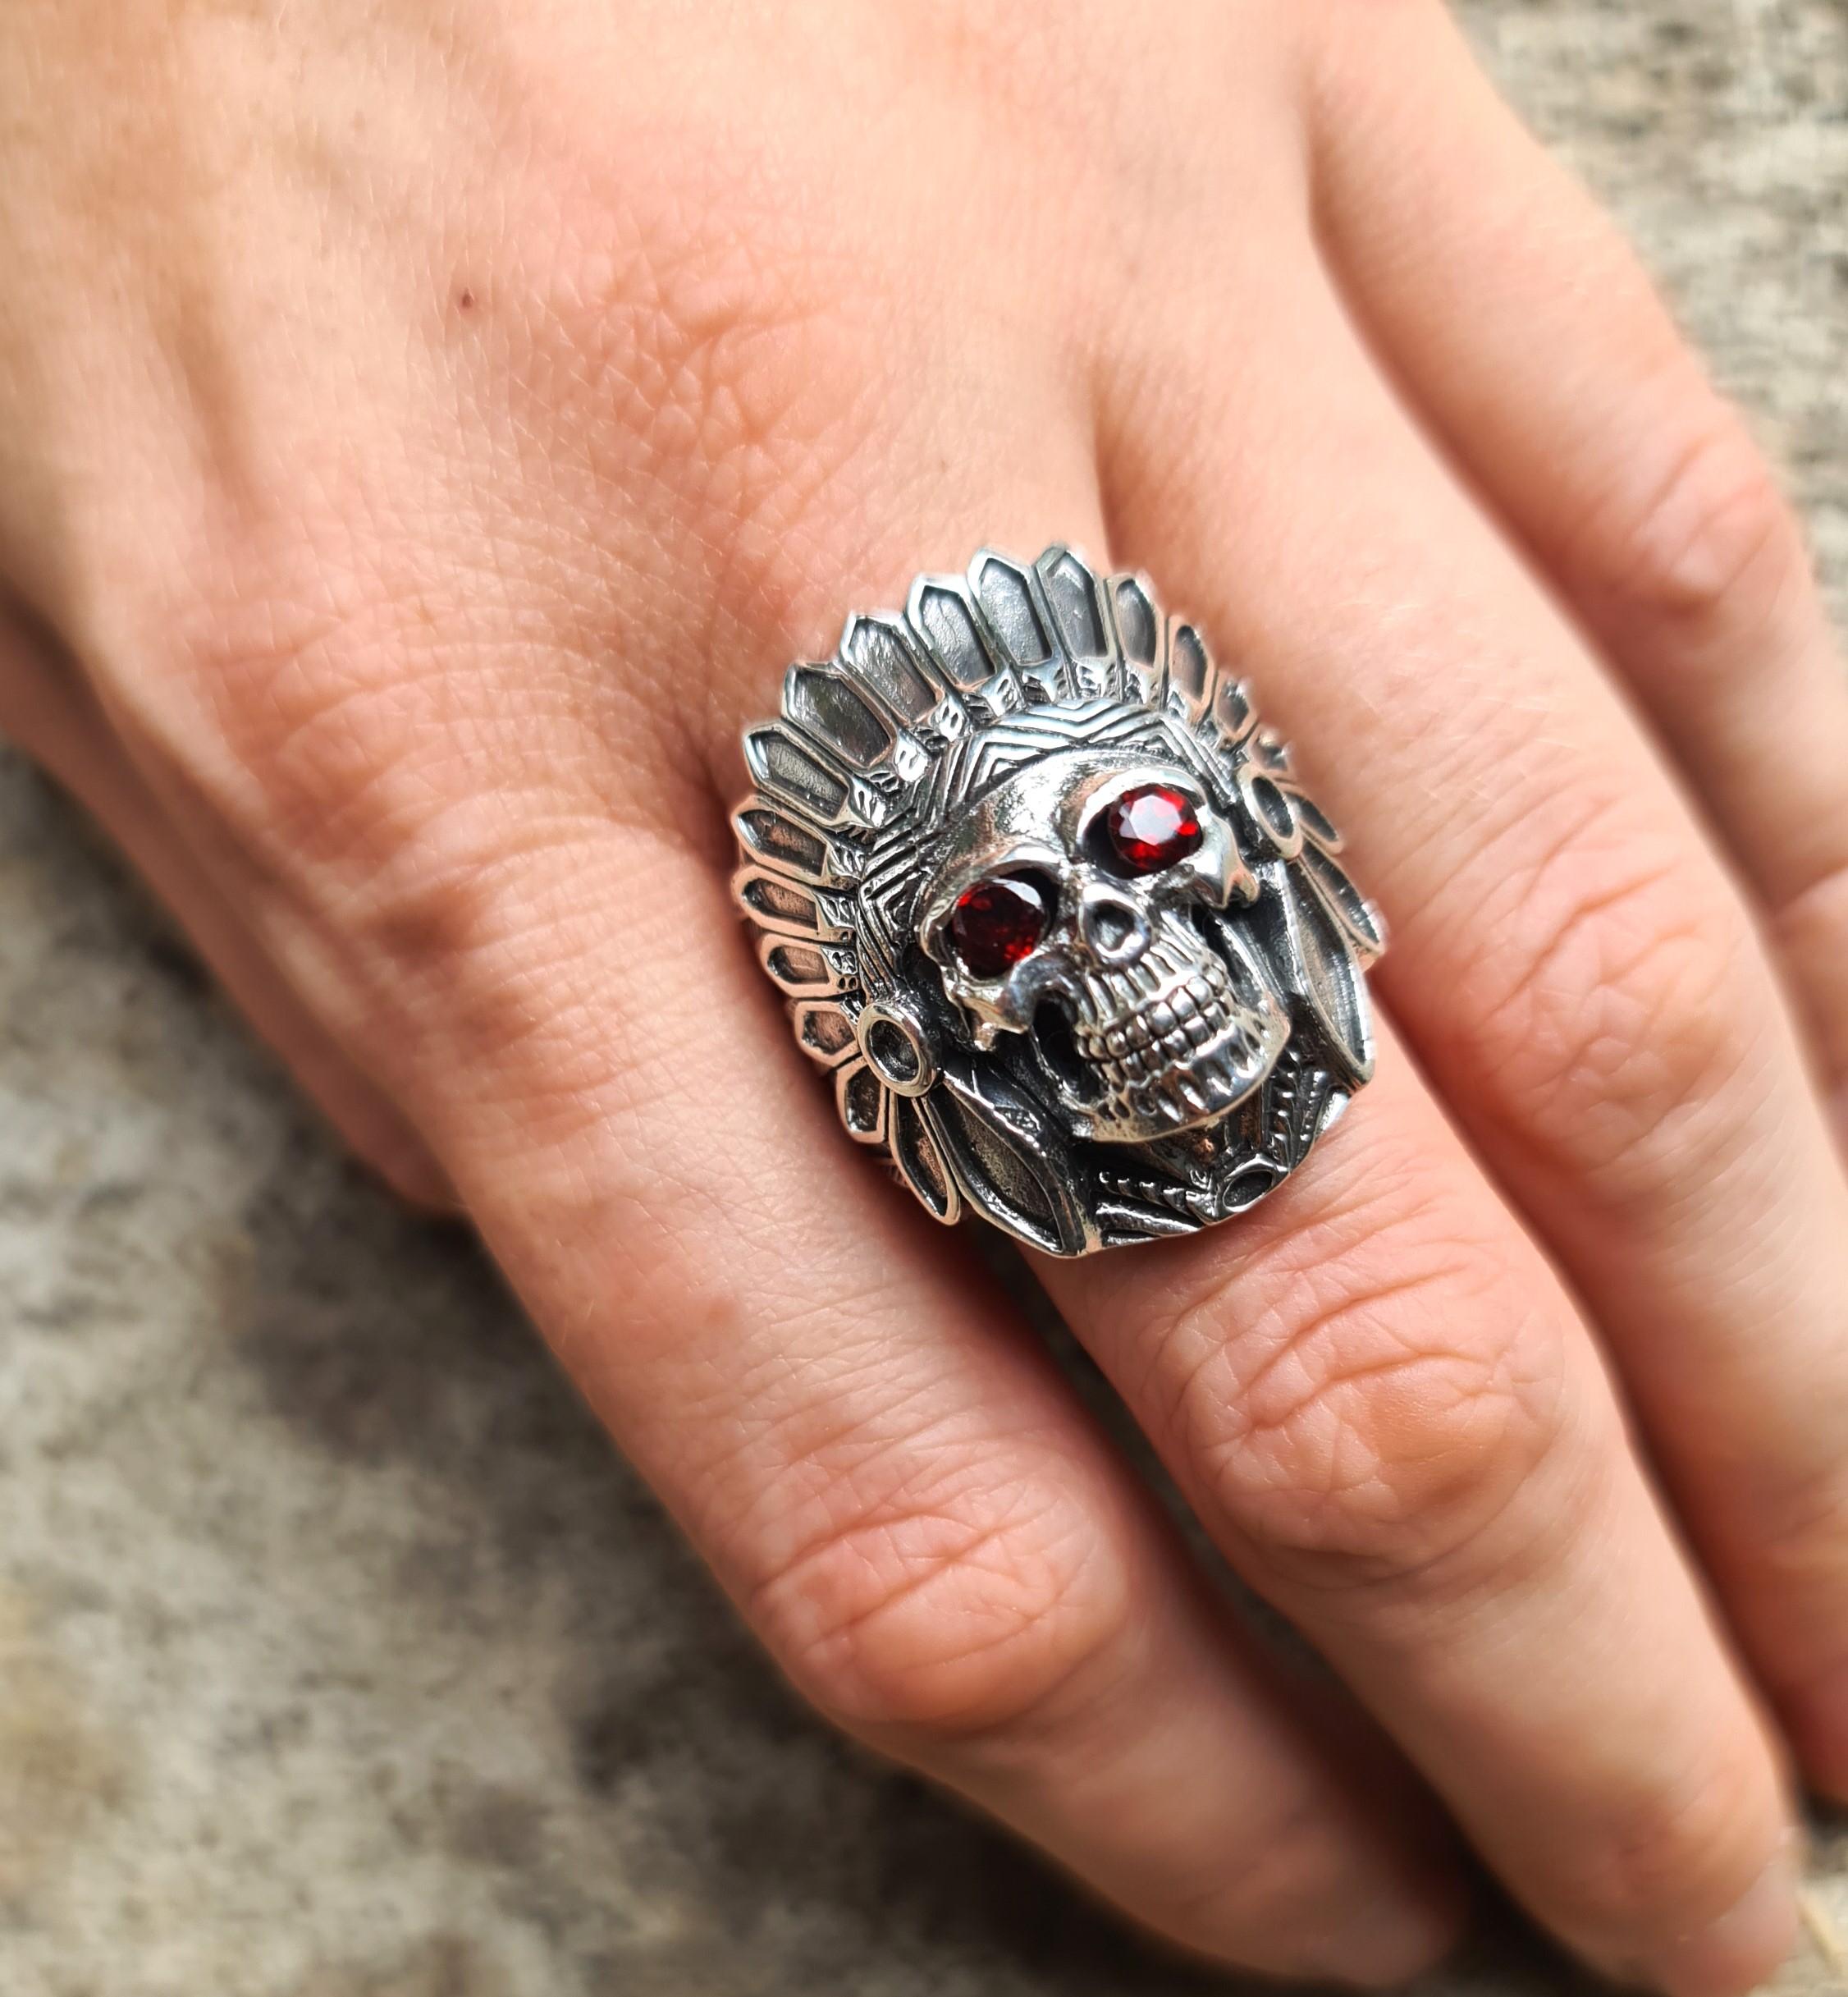 Garnet Eyes American Indian Skull Tribal Chief Warrior Ring Sterling Silver 925 For Sale 1